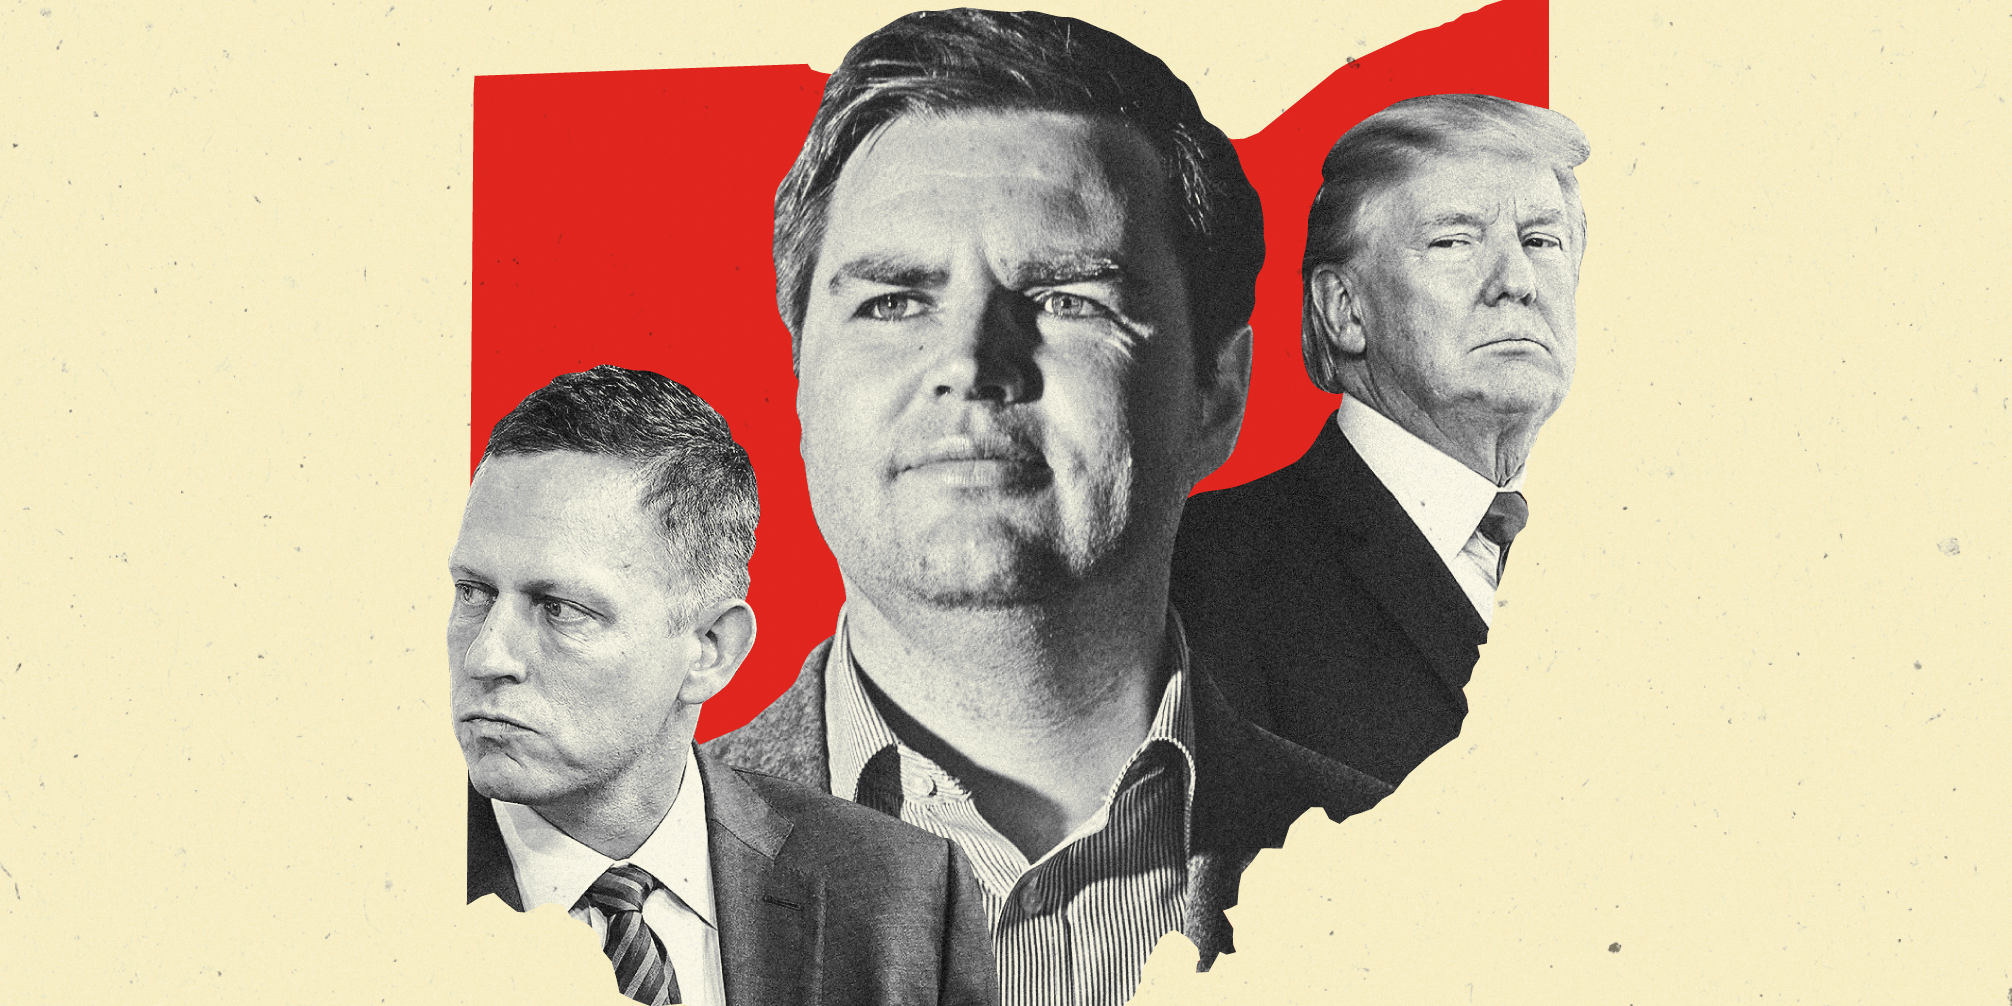 Peter Thiel, J.D. Vance, and Donald Trump inside a red state shape of Ohio on a light yellow background